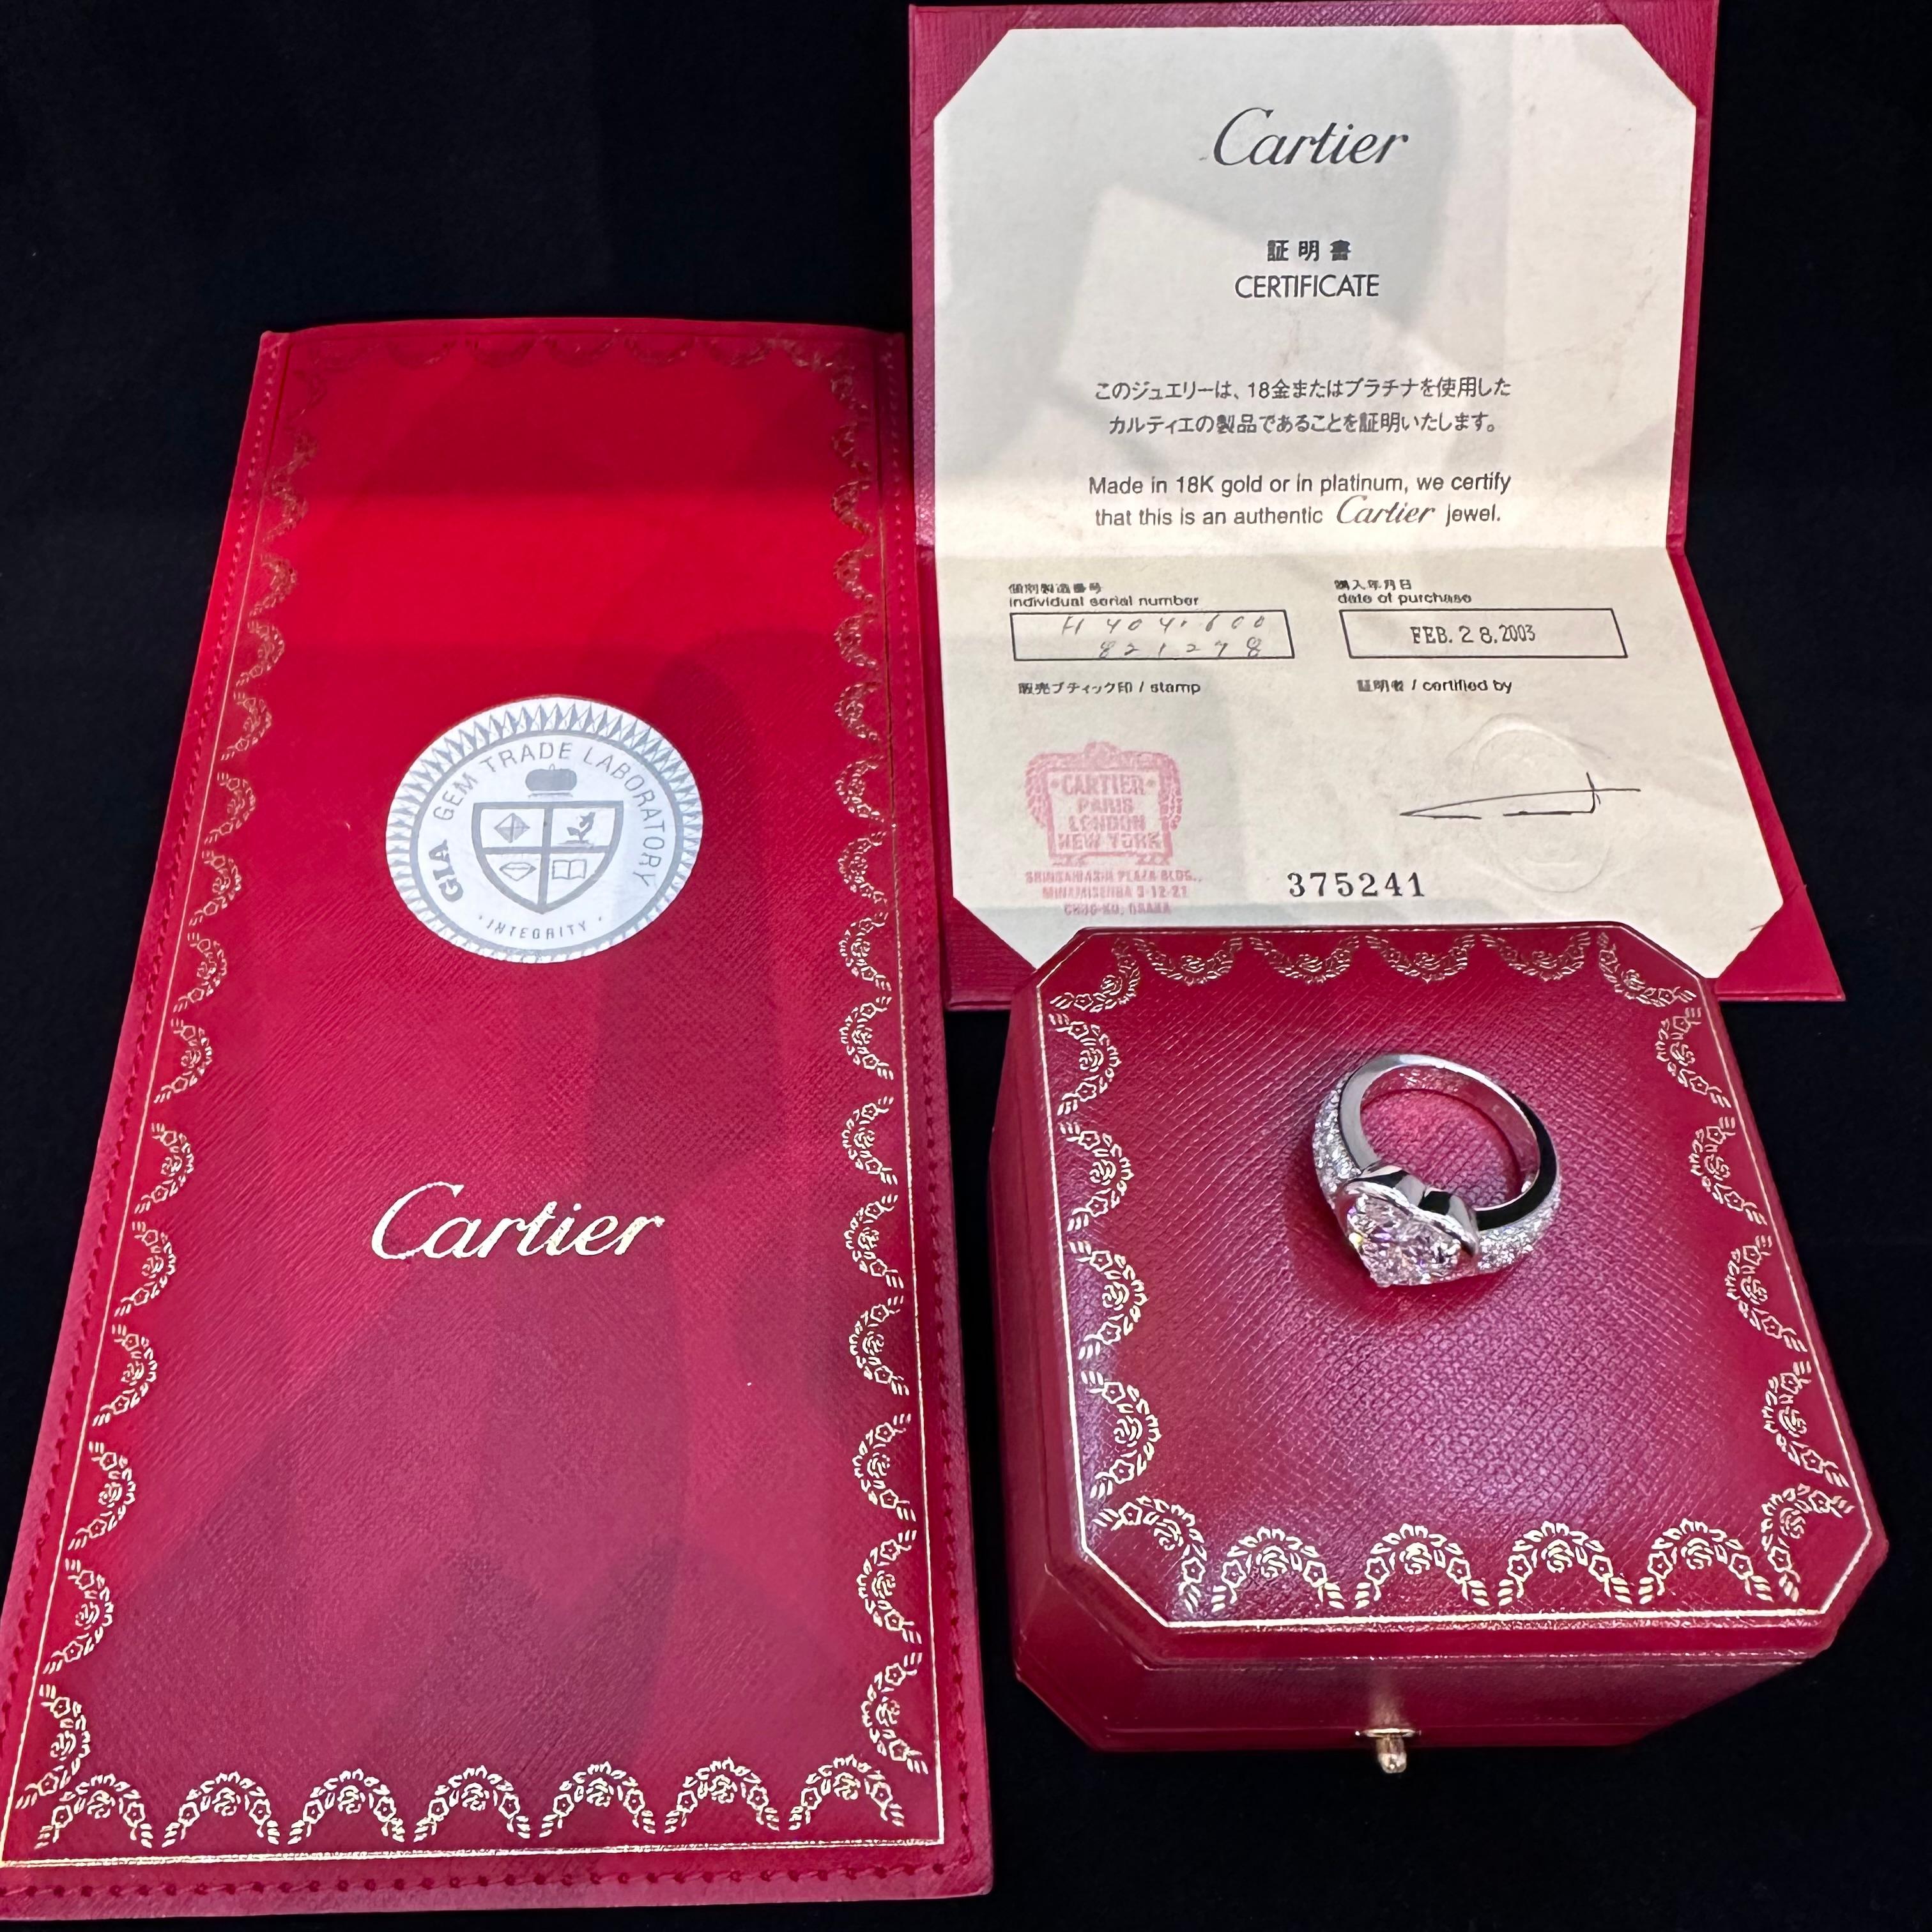 Cartier Paris Important Diamond Ring
3.32 ct D Internally F turn offlawless  
18k White Gold wide Band Style Ring.
The Center Heart Shape is 3.32 cts 
Certified report  by the gemology Institute of America (GIA) as a D Internally Flawless Diamond.